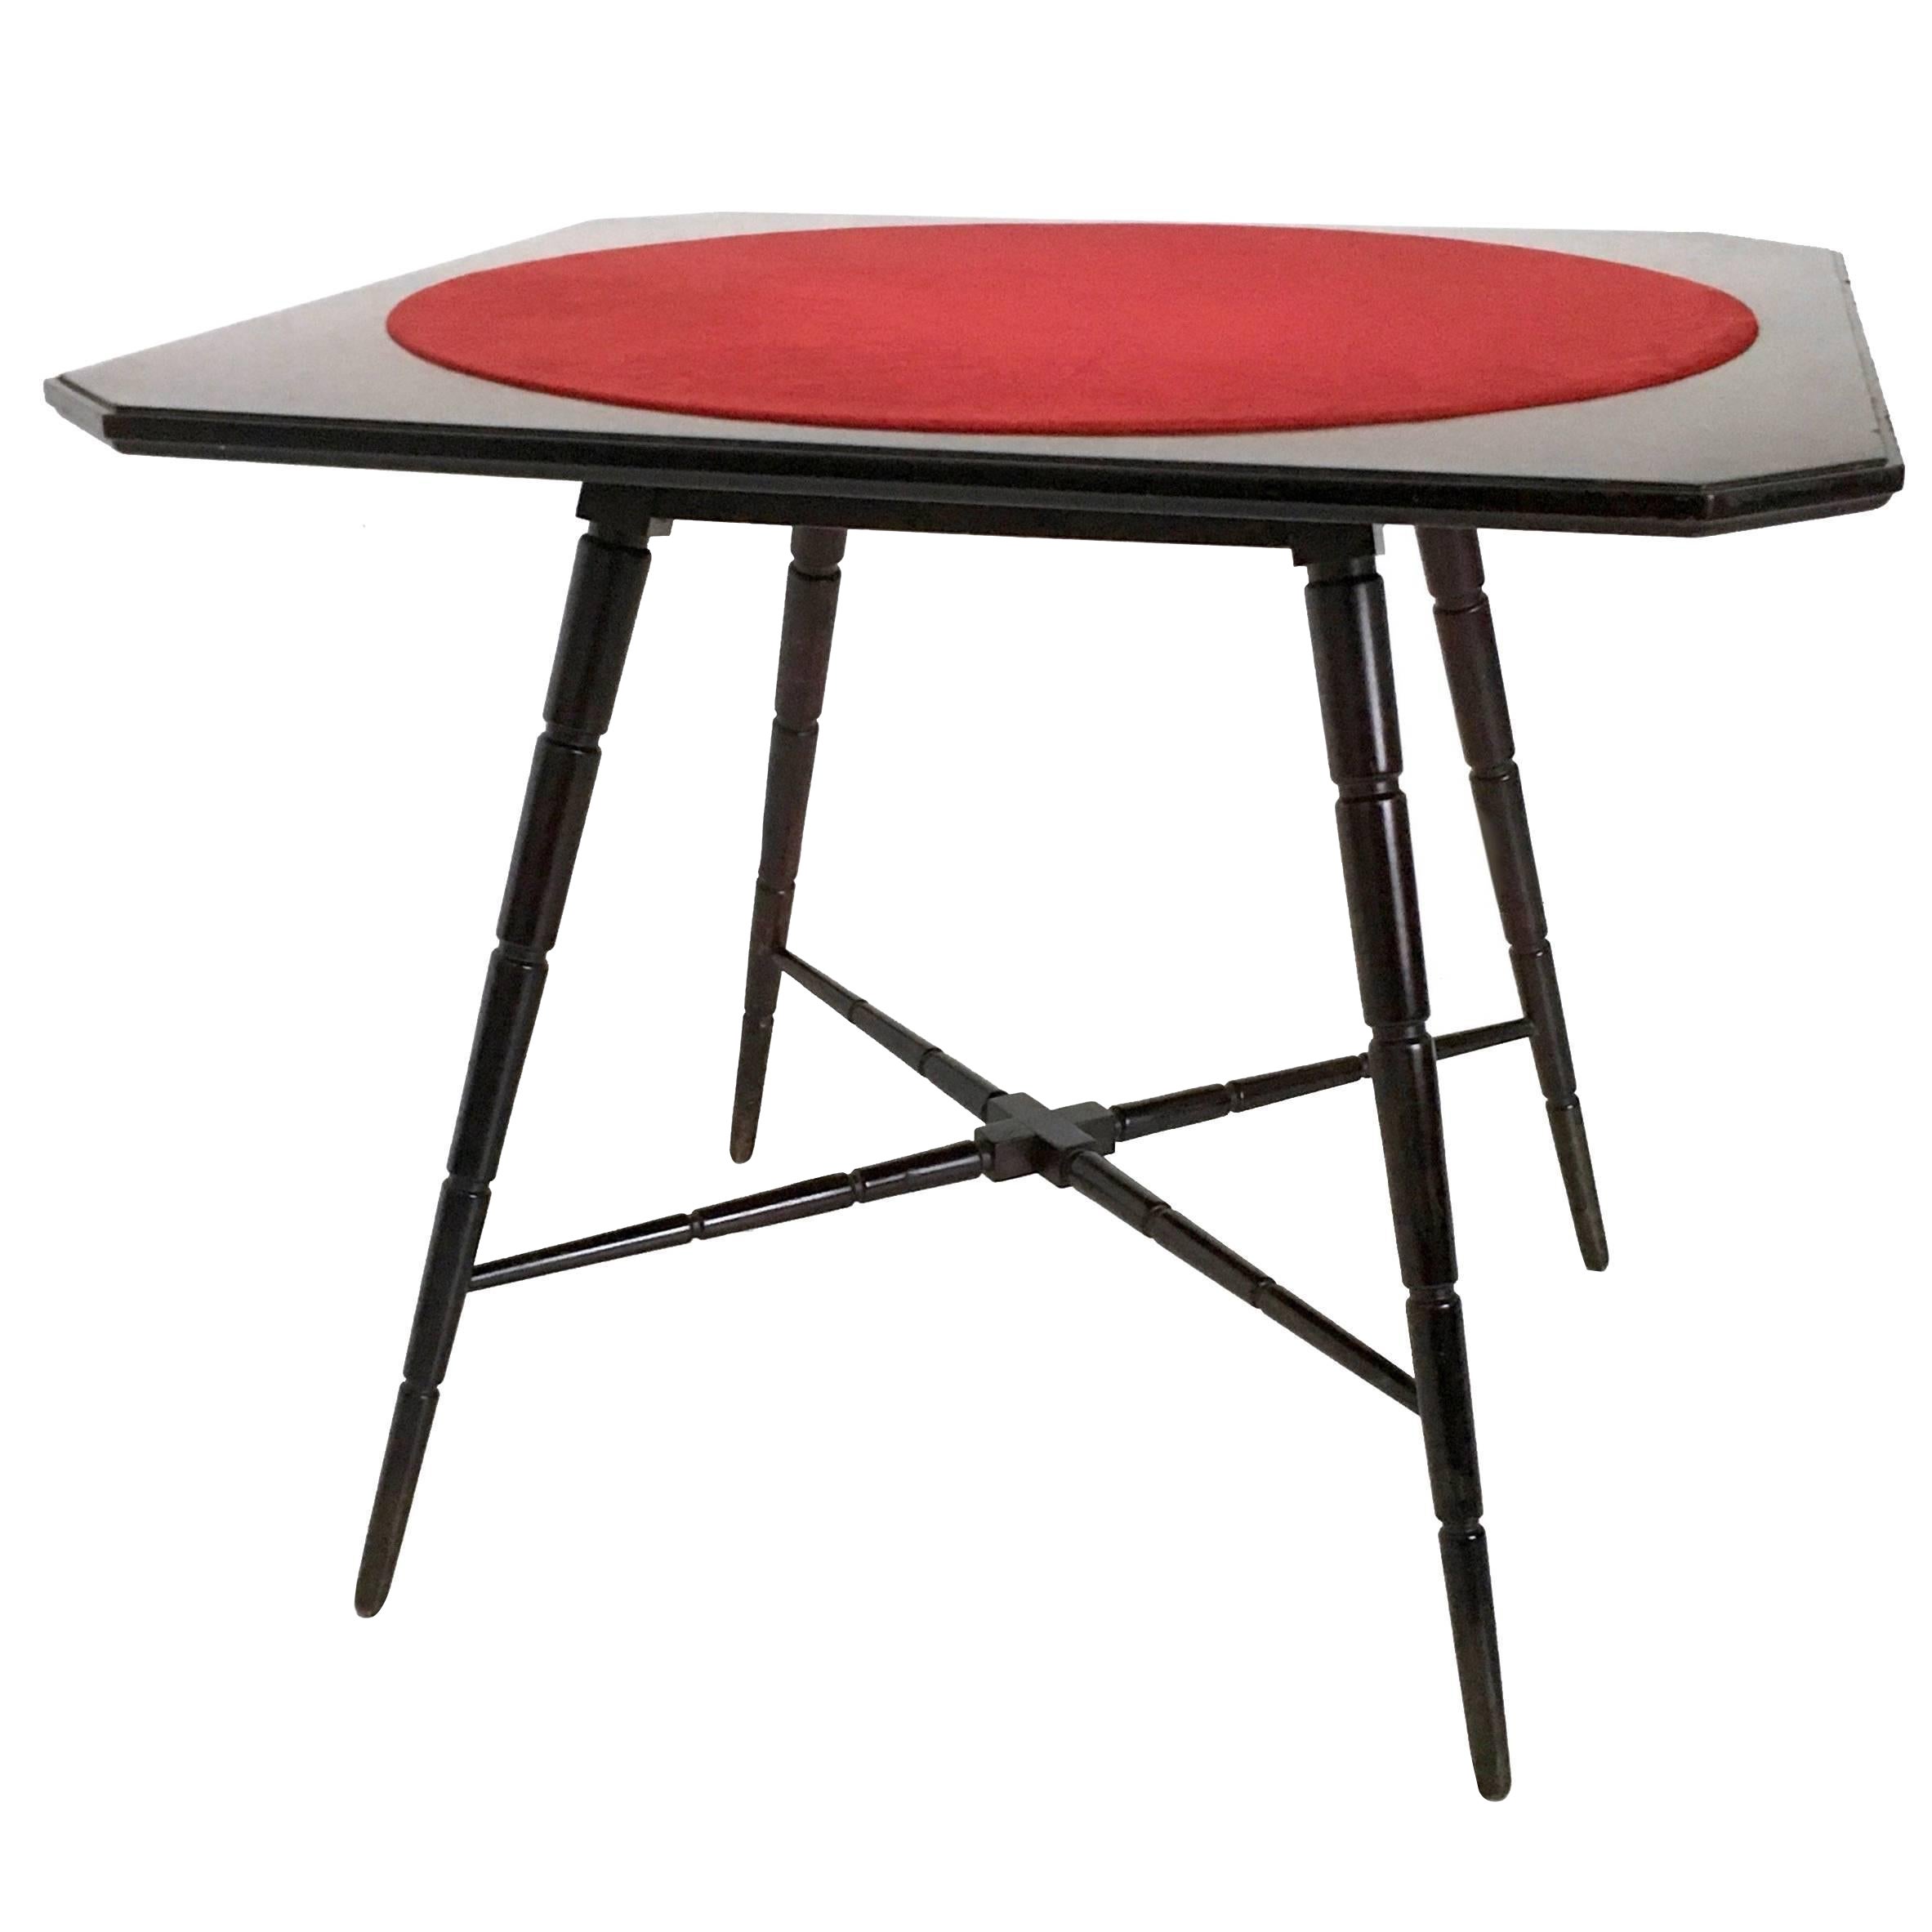 Vintage Ebonized Beech Game Table Produced by Chiavari with Red Fabric, Italy 